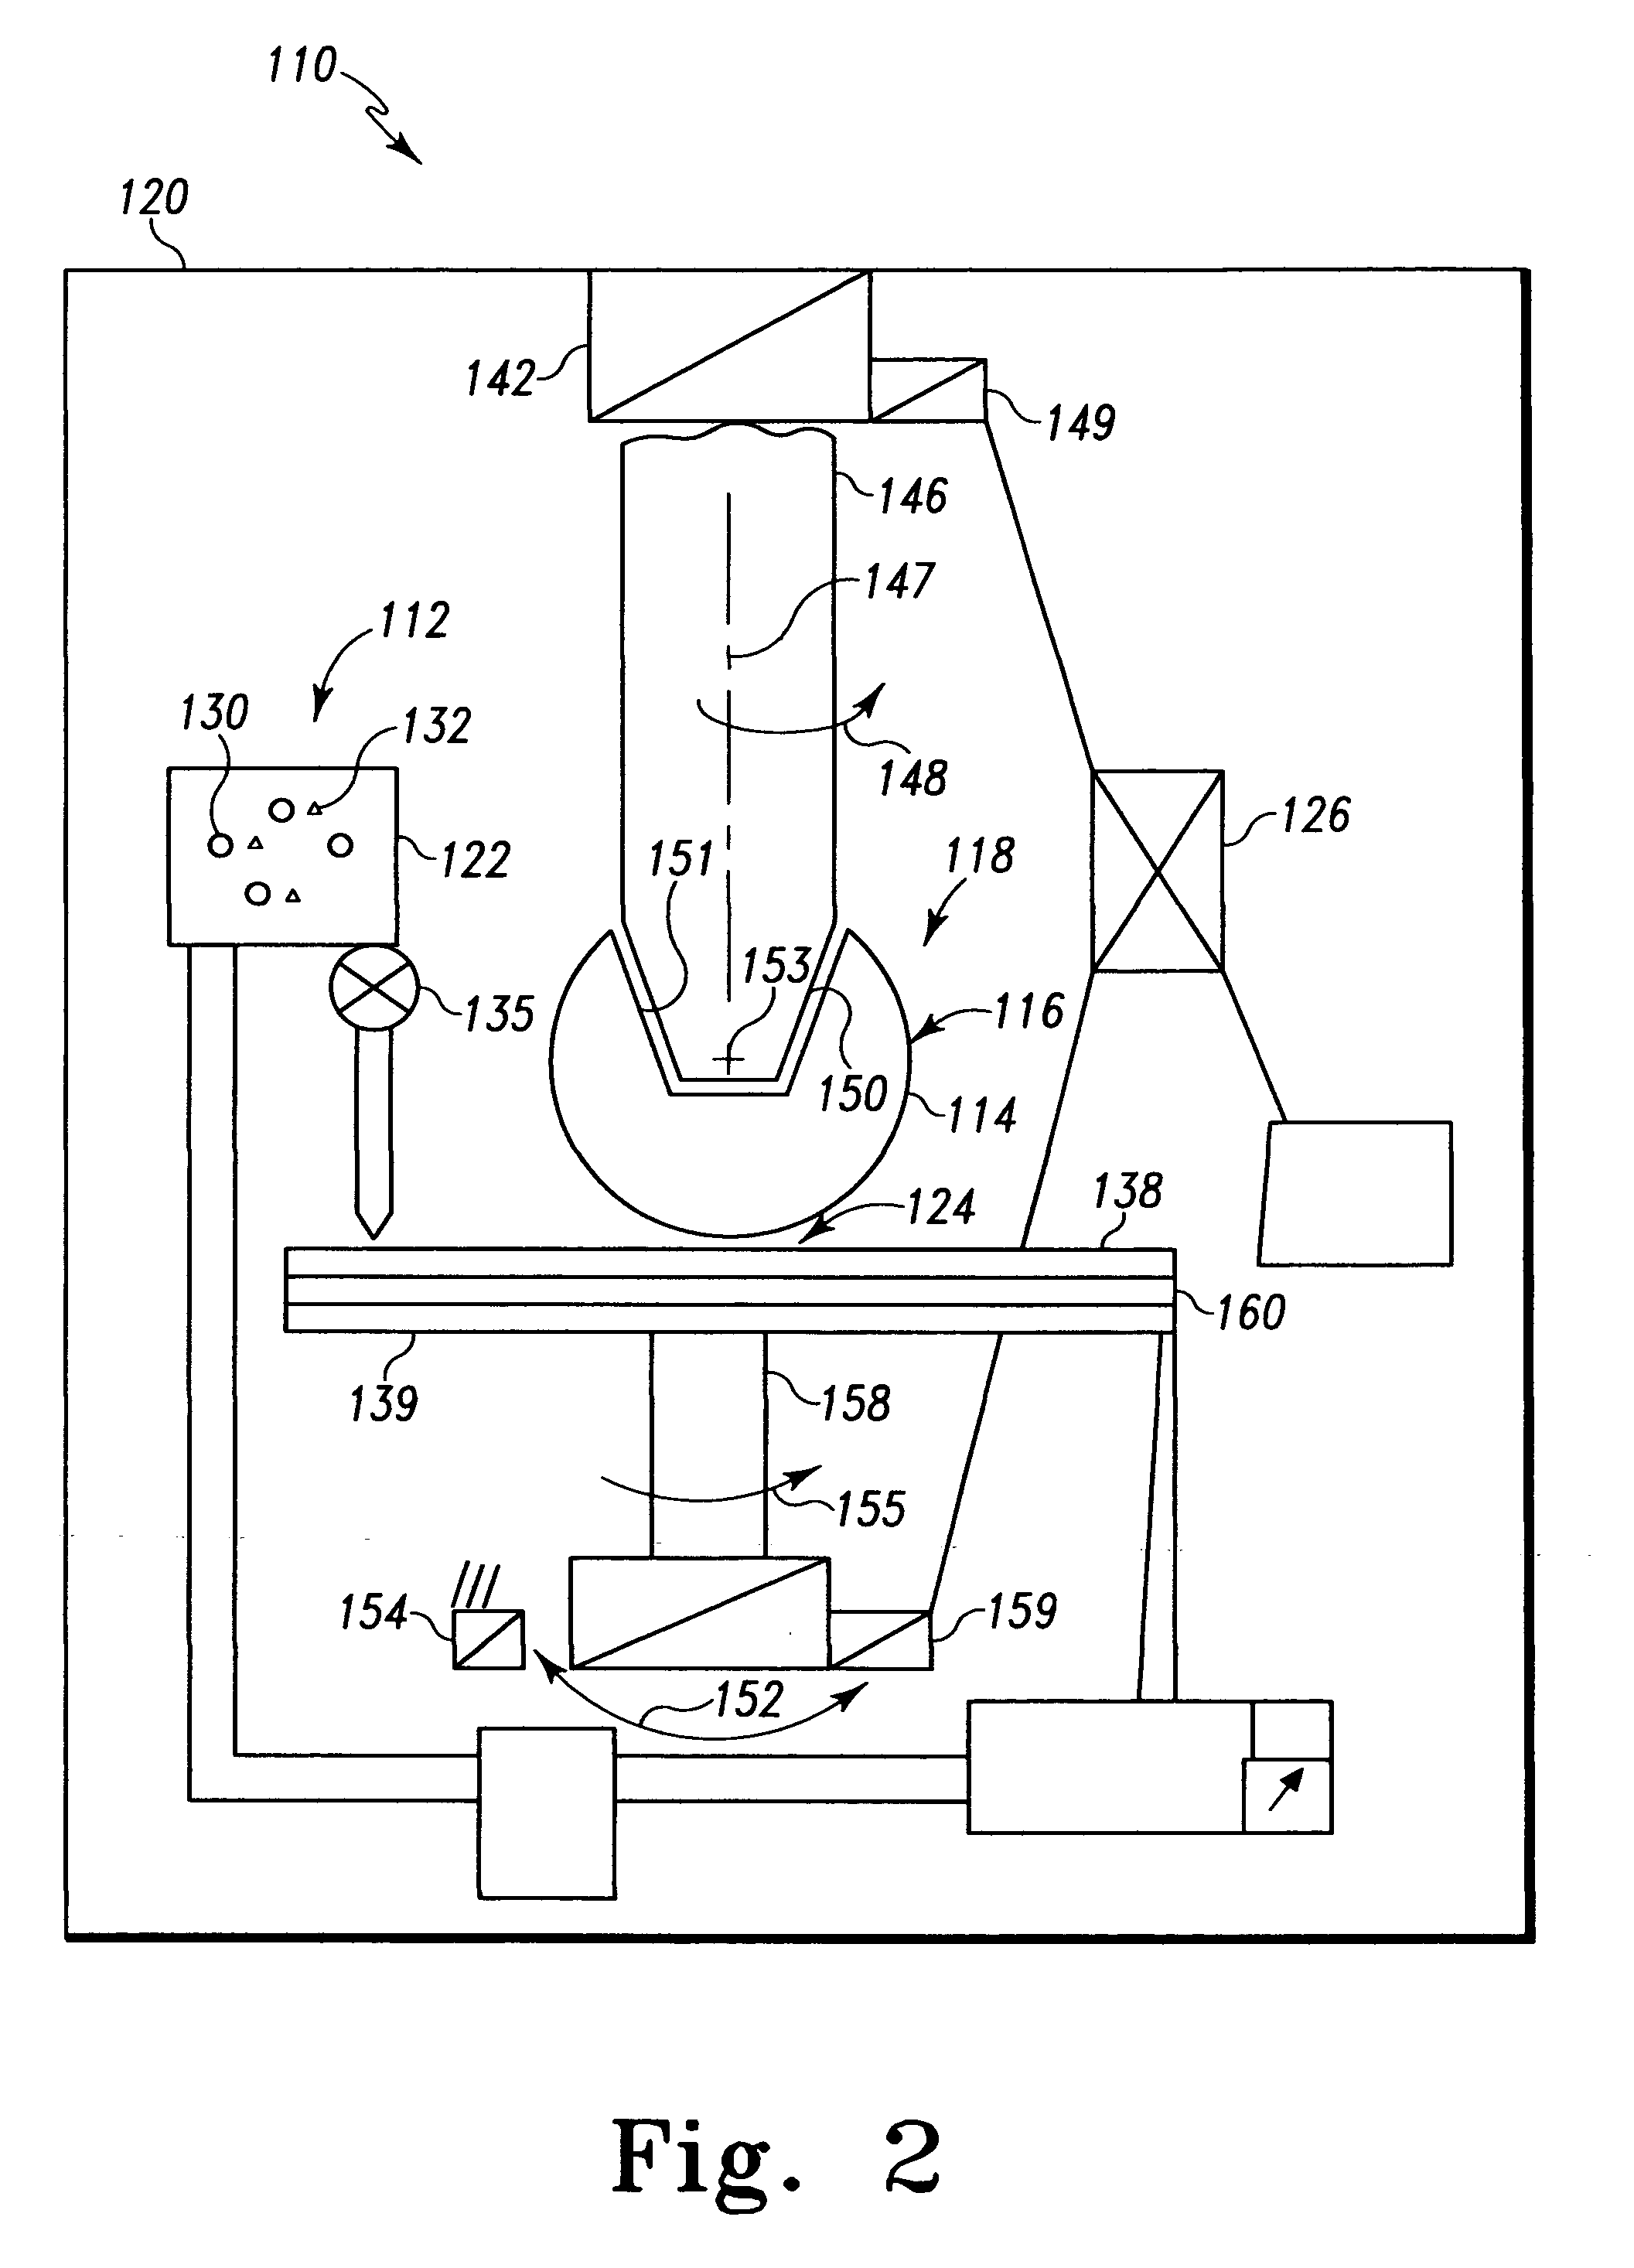 Orthopaedic component manufacturing method and equipment